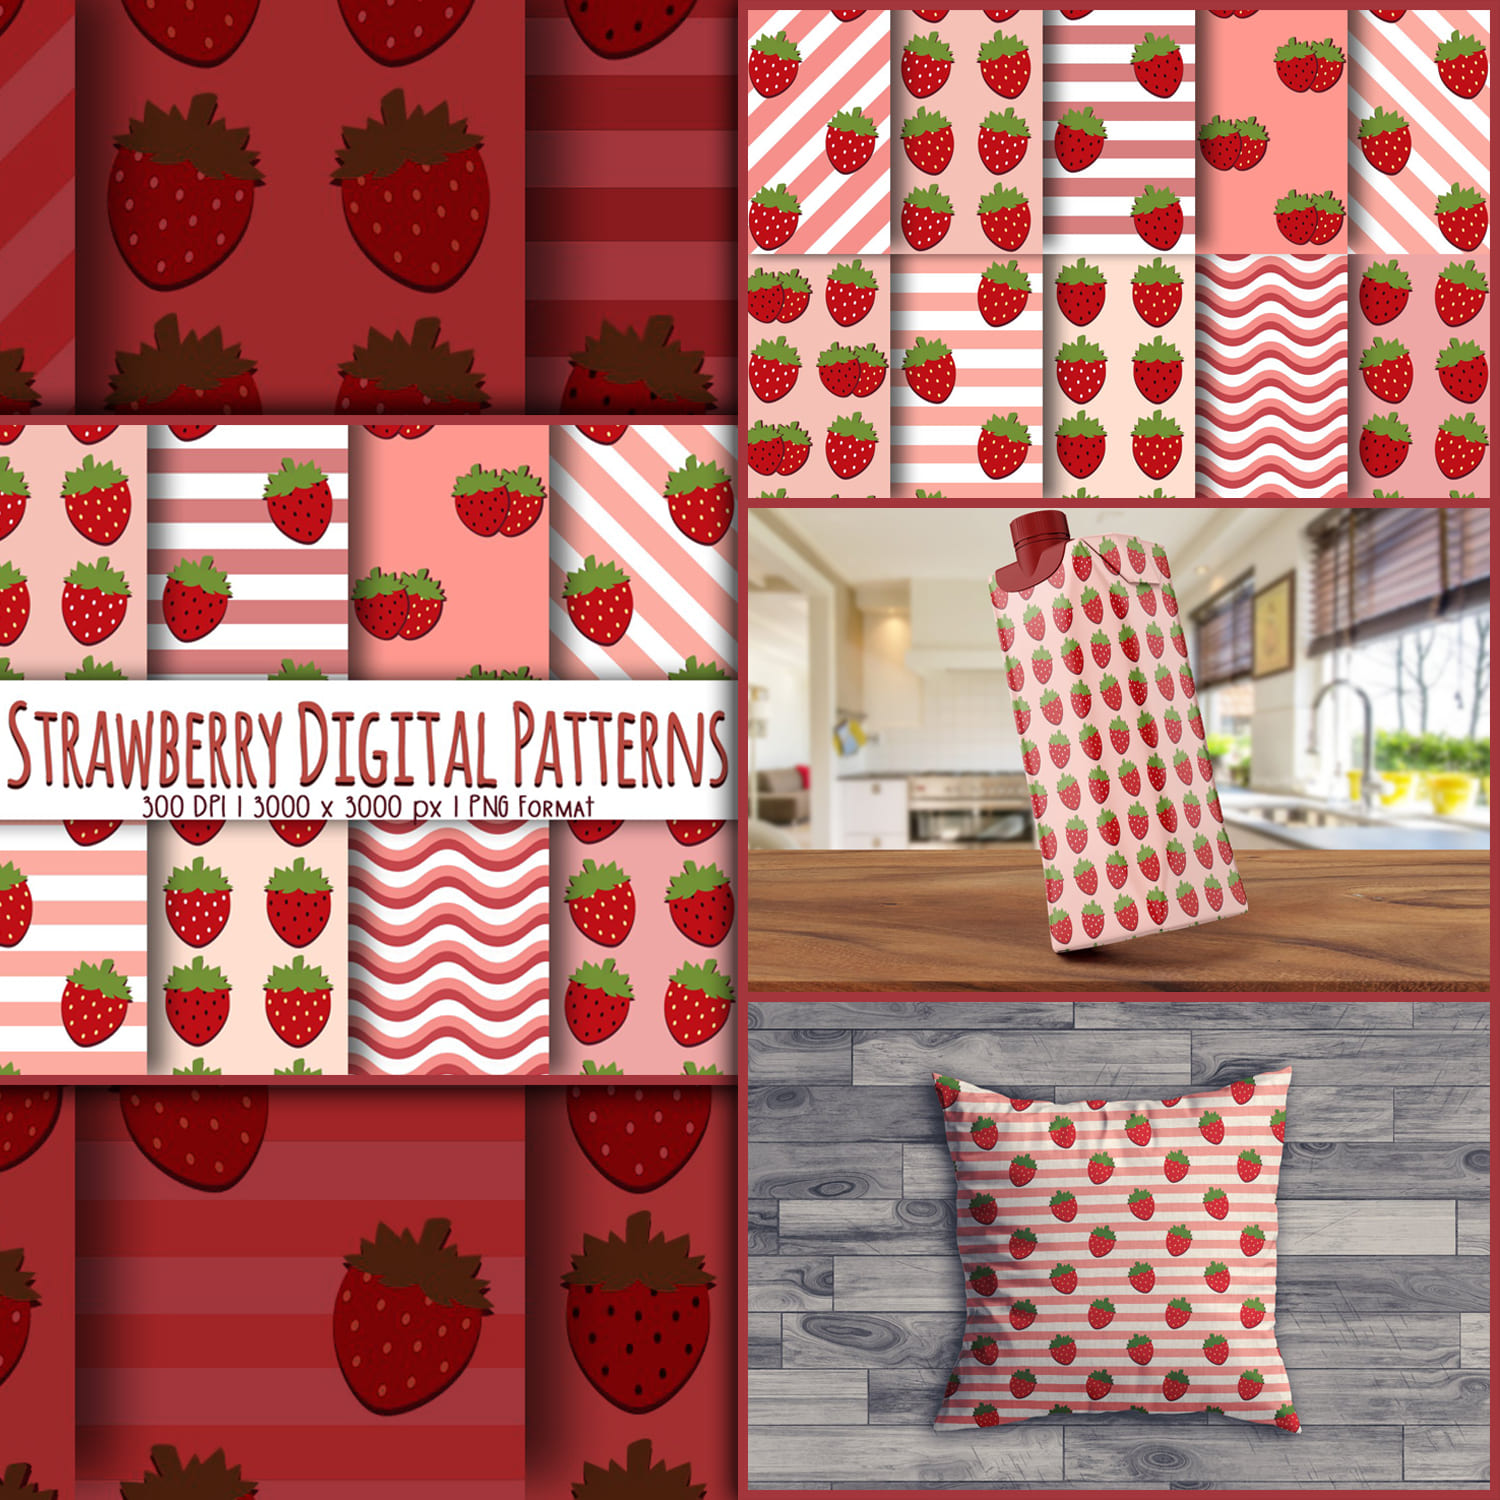 Examples of using the strawberry pattern in the household.